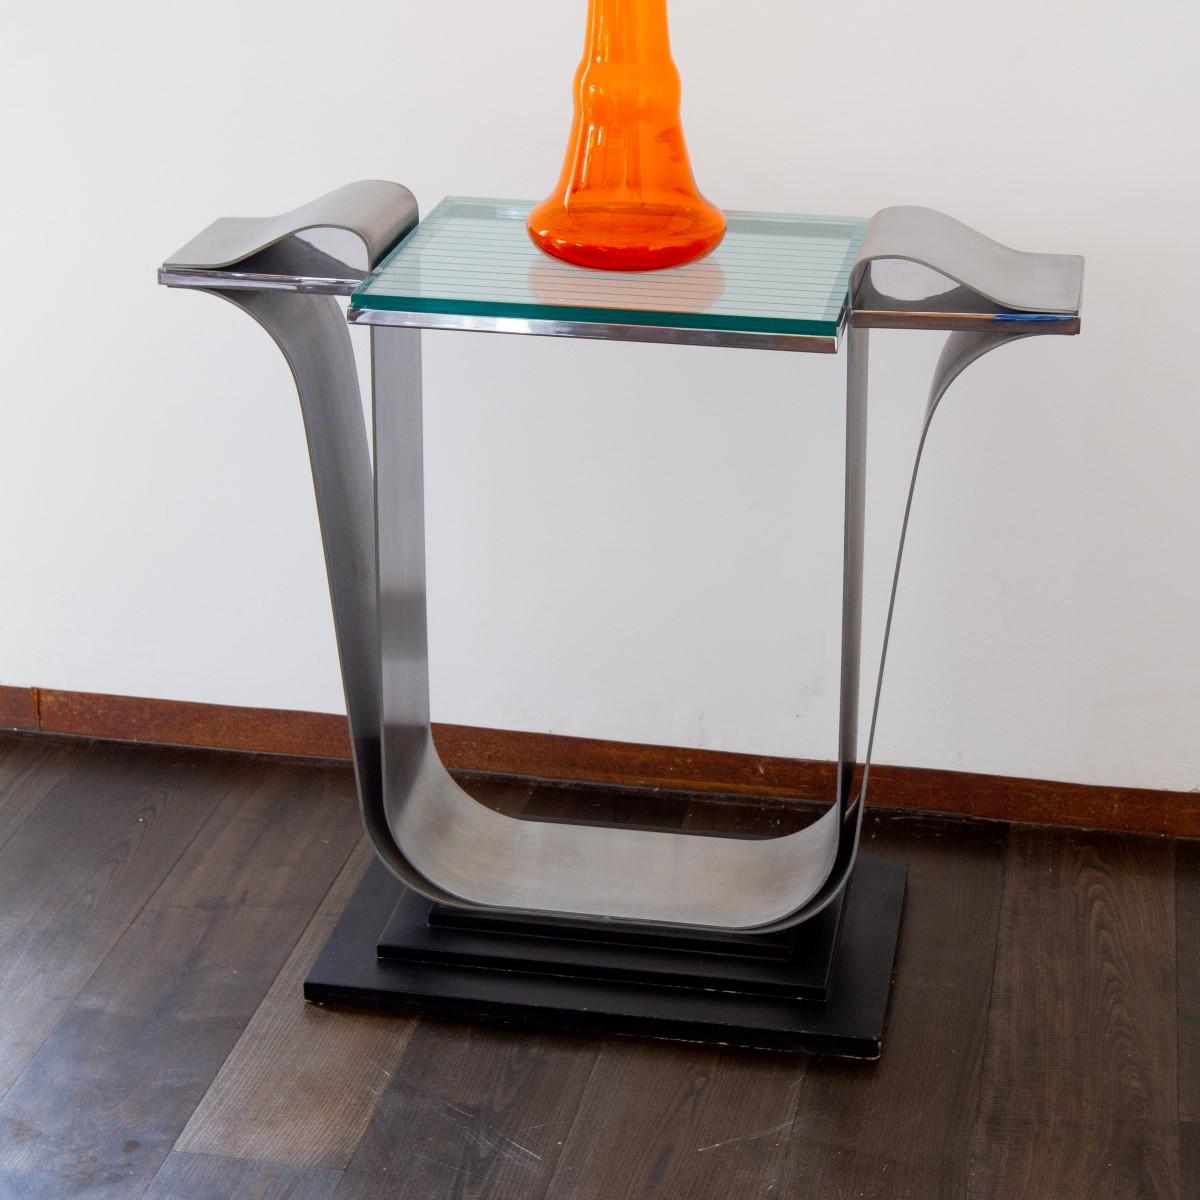 A Jay Spectre designed brushed and polished steel console table with linear etched glass top on a stepped ebonised base, 1980s.

Jay Spectre (1929-1992) was a New York based interior and furniture designer. He set up Jay Spectre Inc in 1968 which